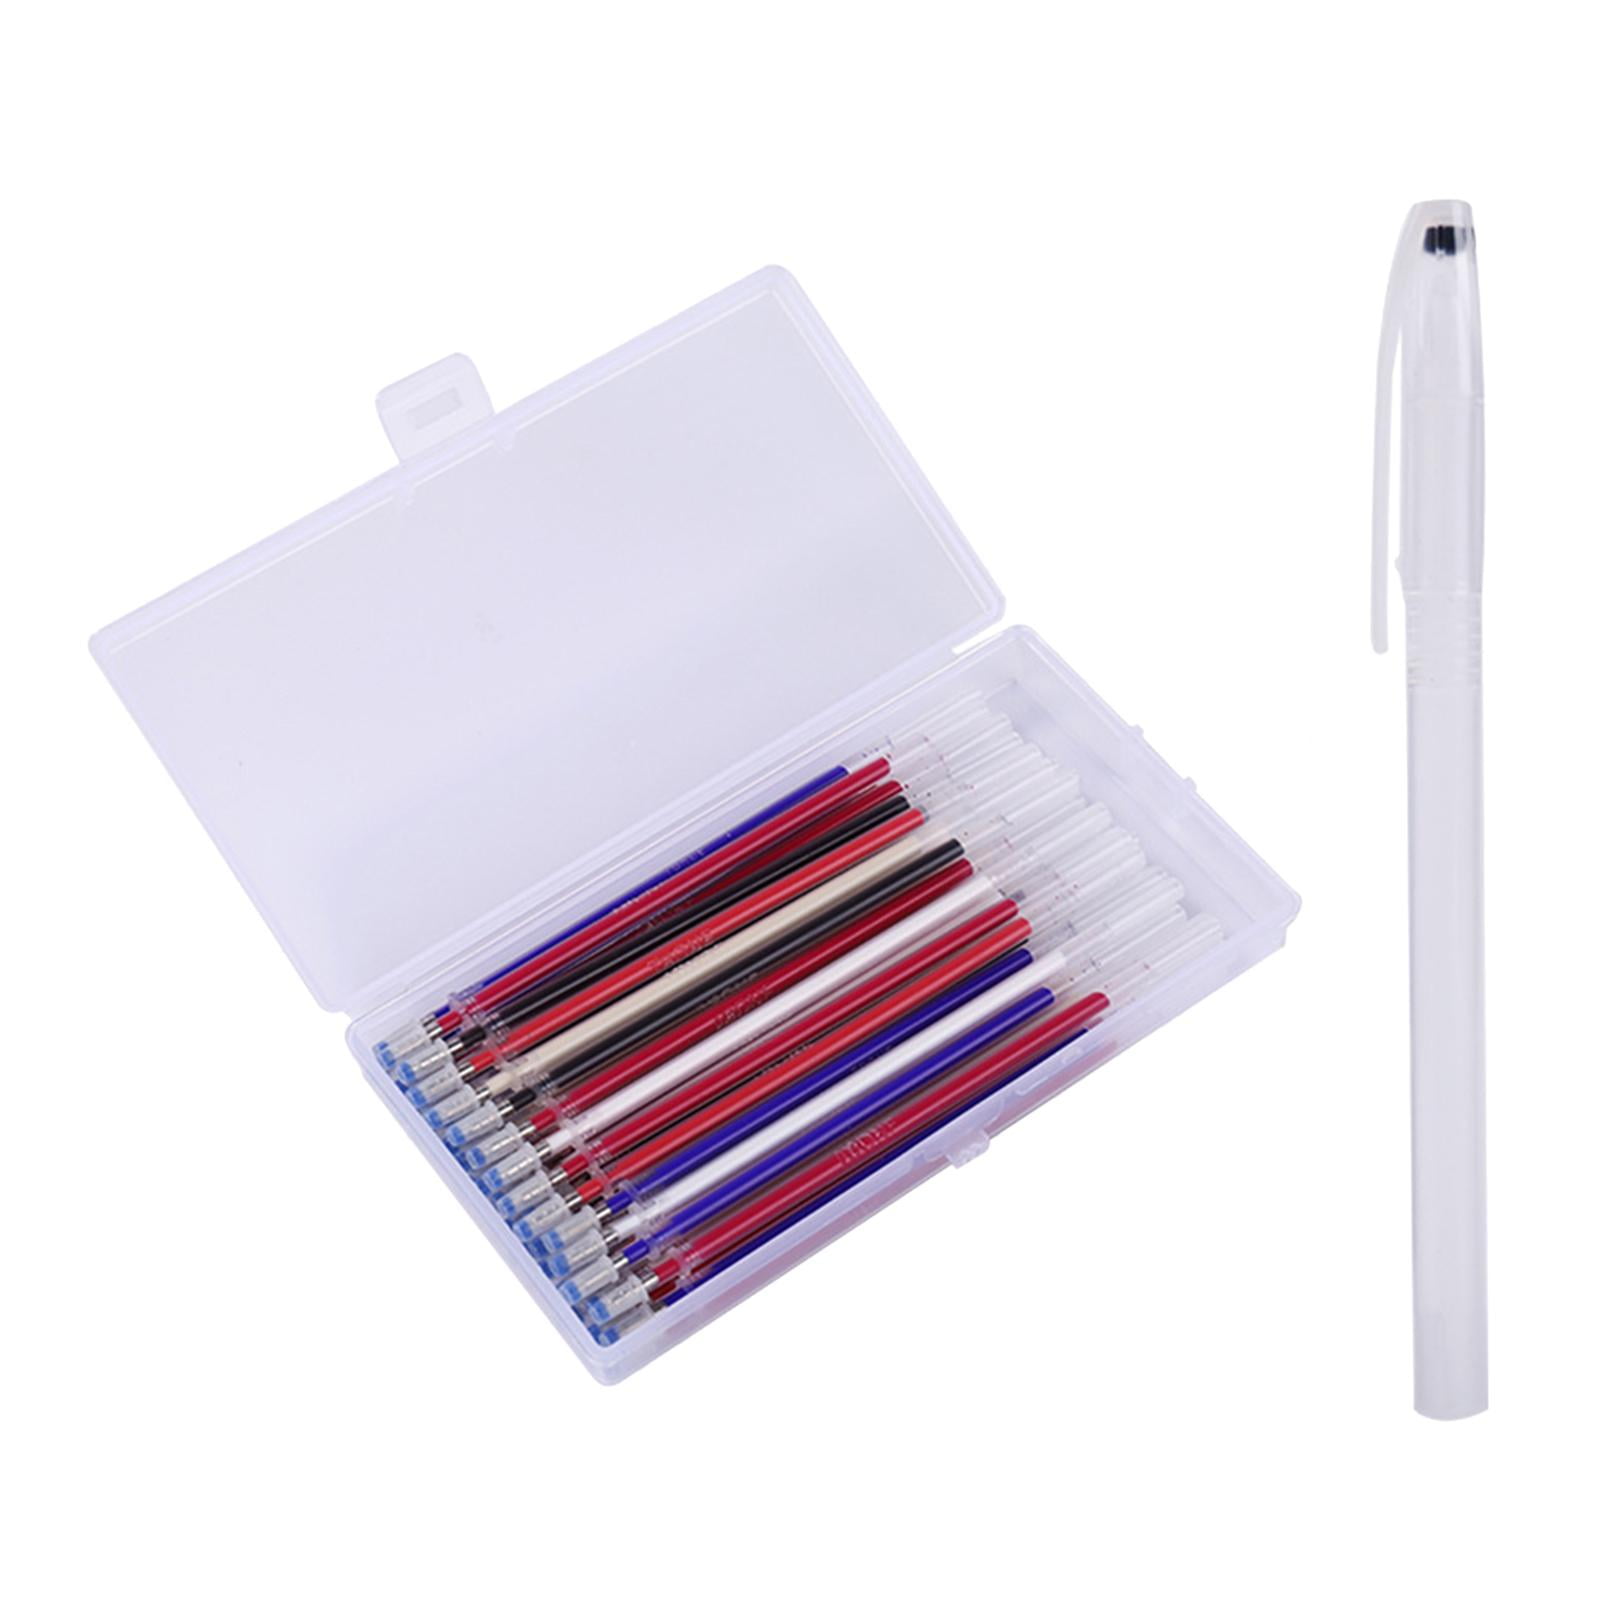 40Pcs Heat Erase Pens, Heat Erasable Refill Pens Fabric Marking Pens  Disappearing Quilting, Sewing, Dressmaking, Embroidery Craft Projects Blue  